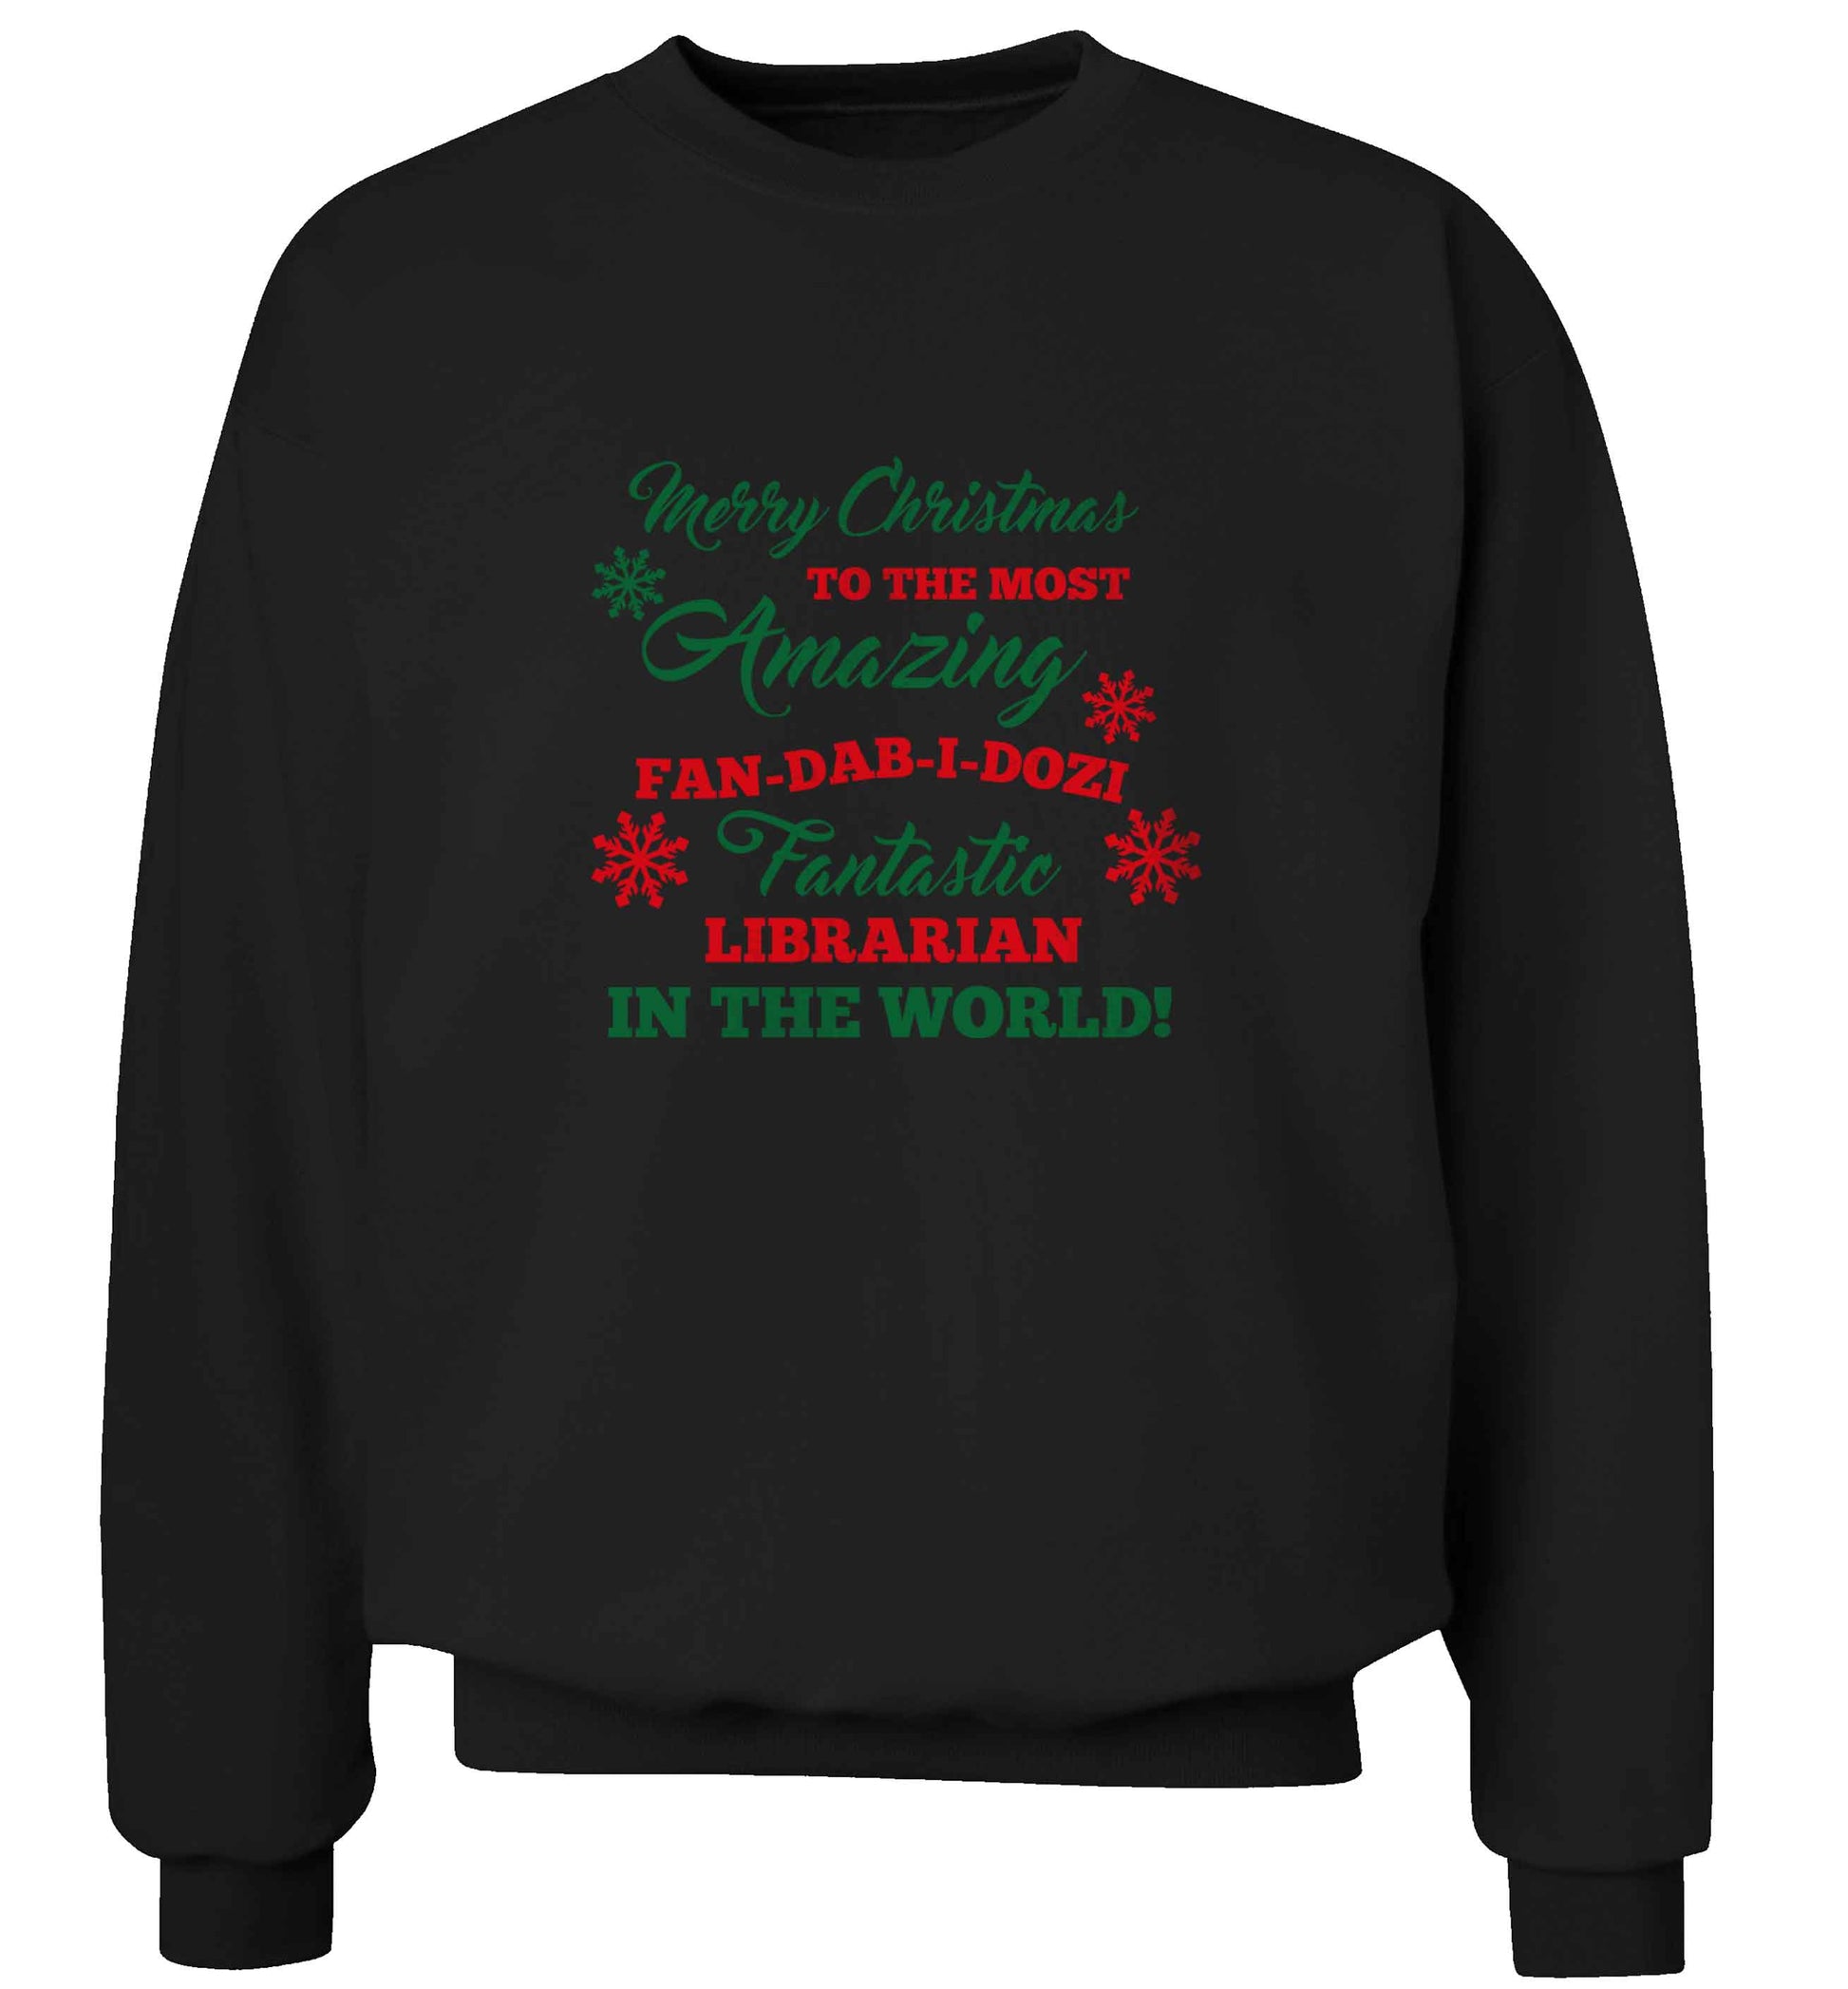 Merry Christmas to the most amazing librarian in the world! adult's unisex black sweater 2XL